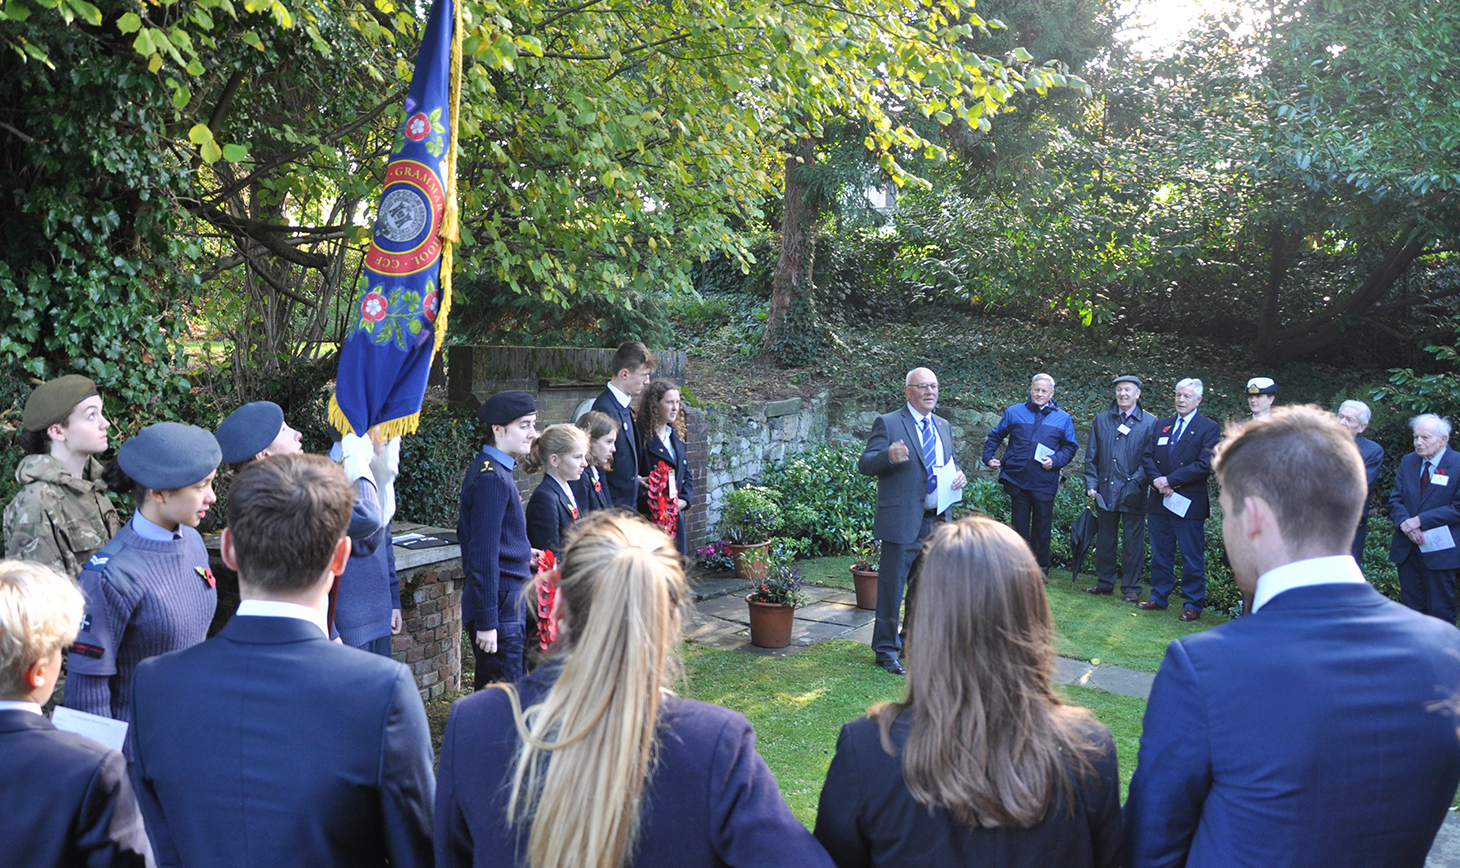 Act of Remembrance Service